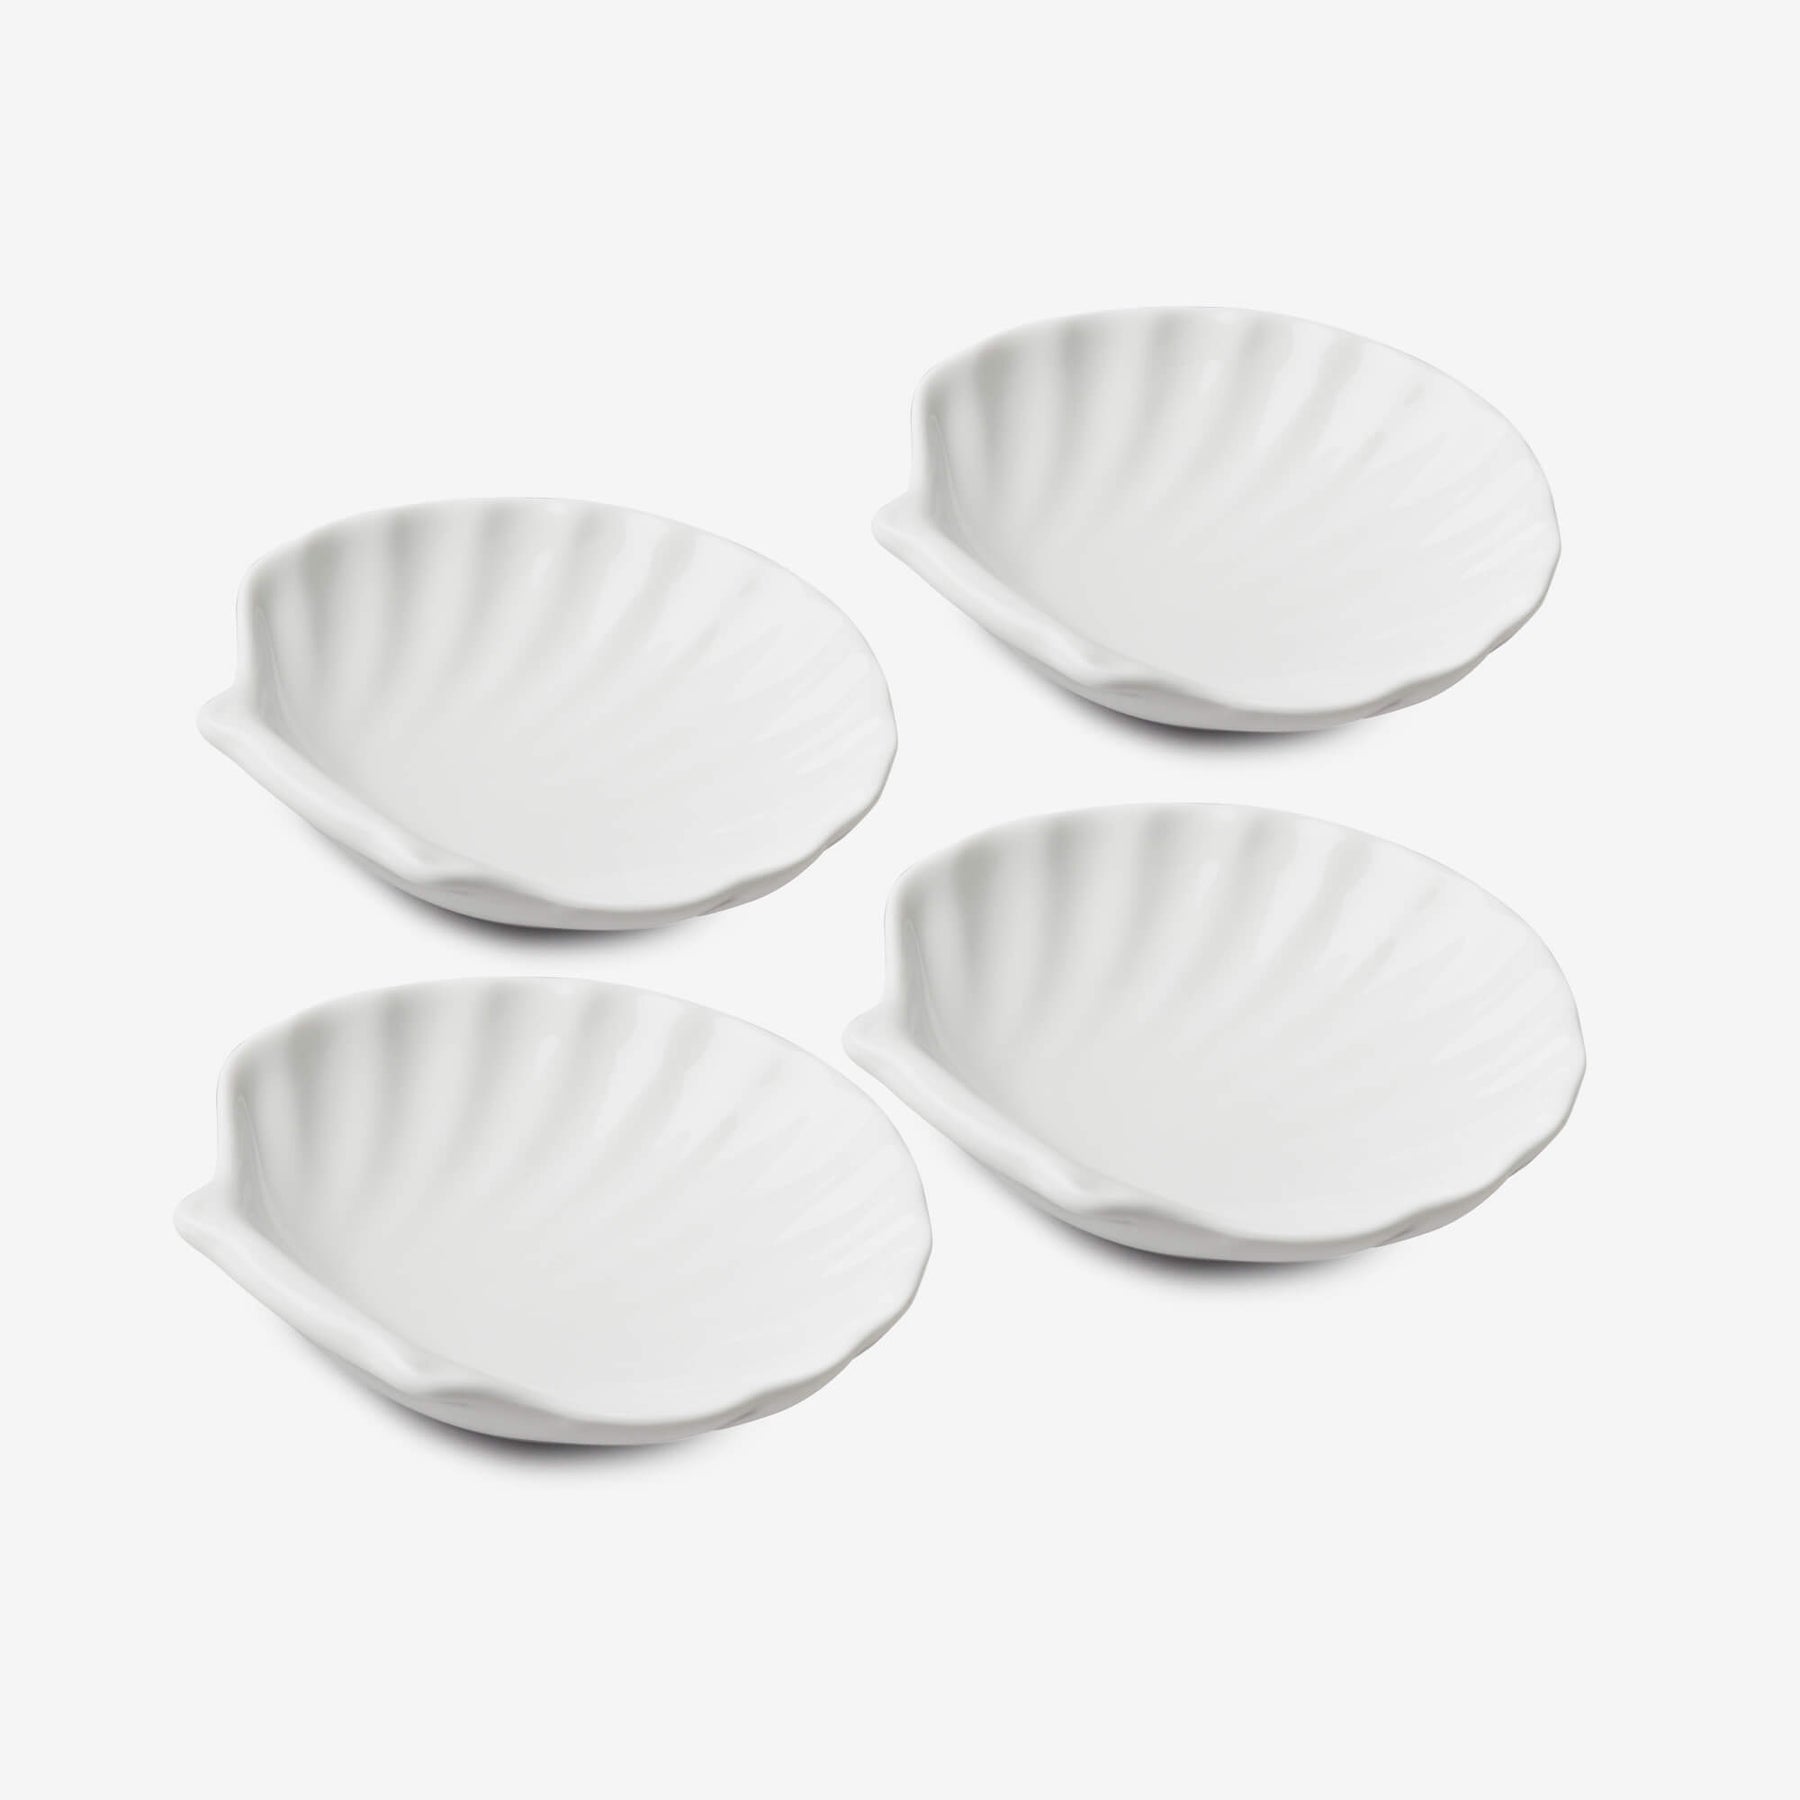 Porcelain Shell Dishes, Set of 4, Available in 3 Sizes